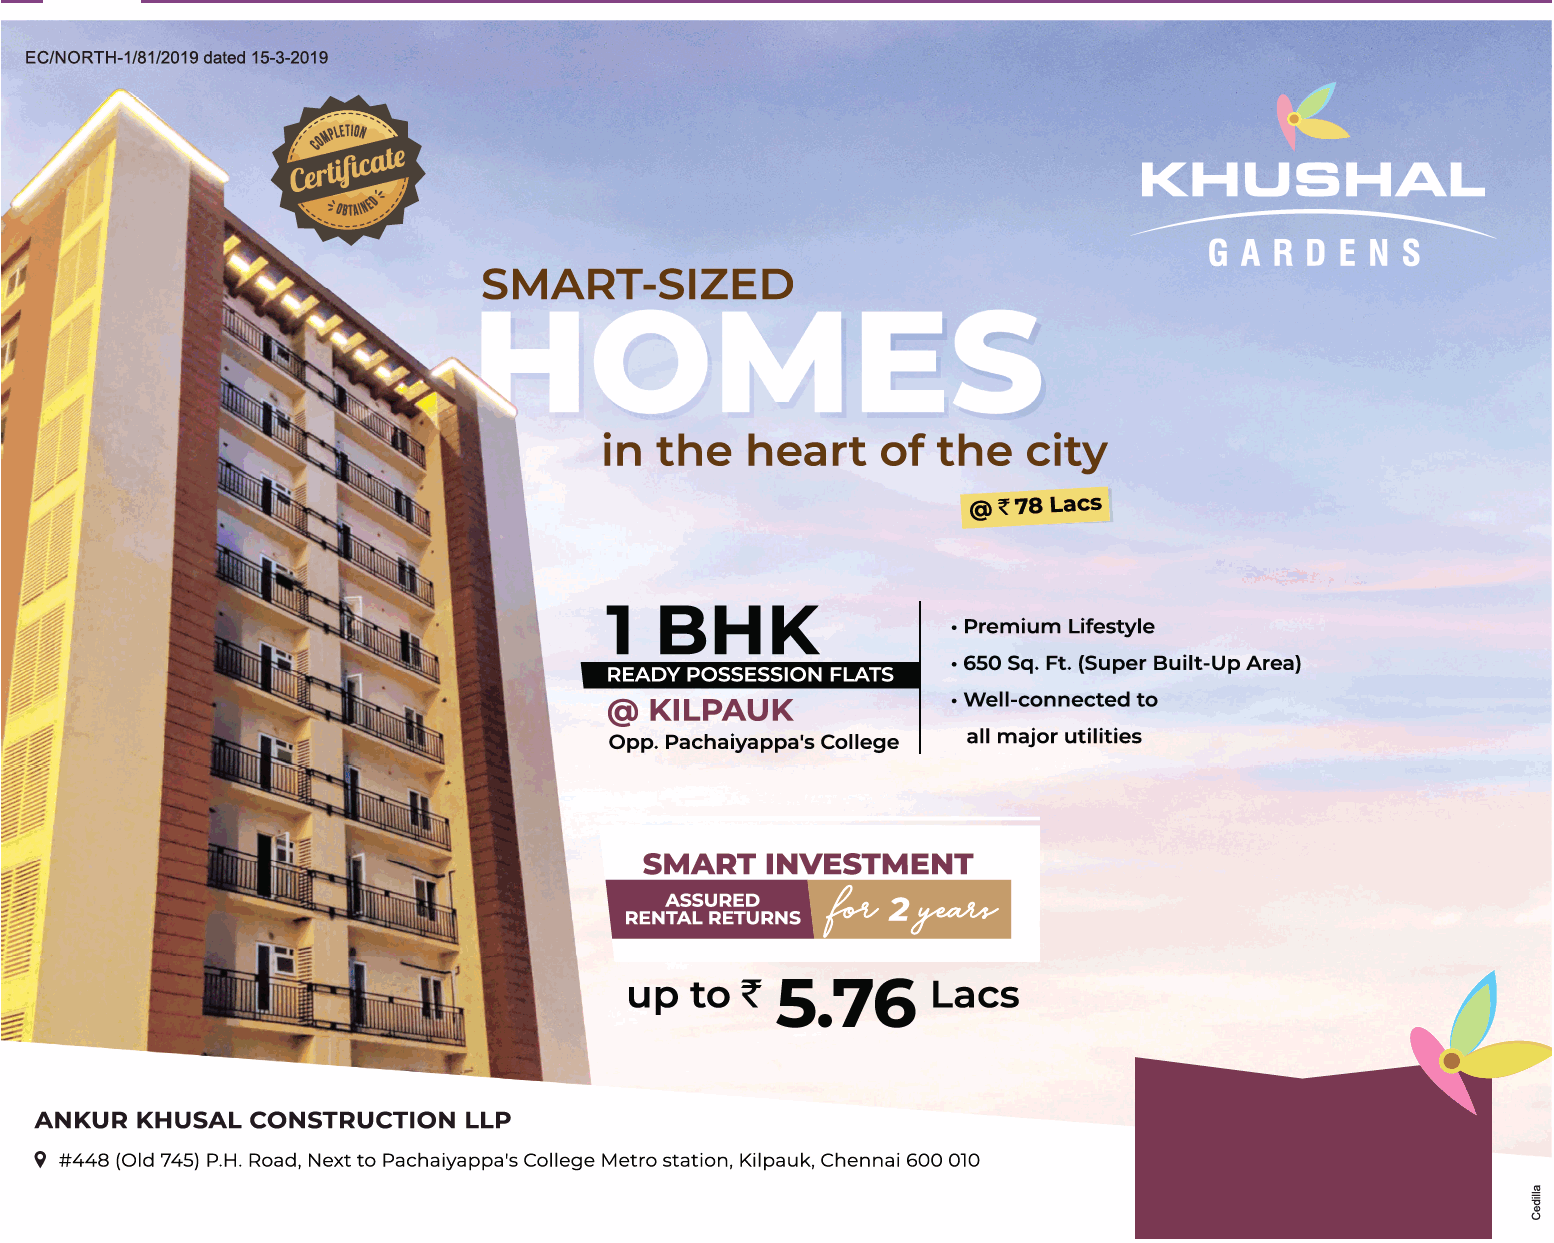 Smart investment assured rental returns up to Rs 5.76 Lac at Ankur Khushal Gardens, Chennai Update